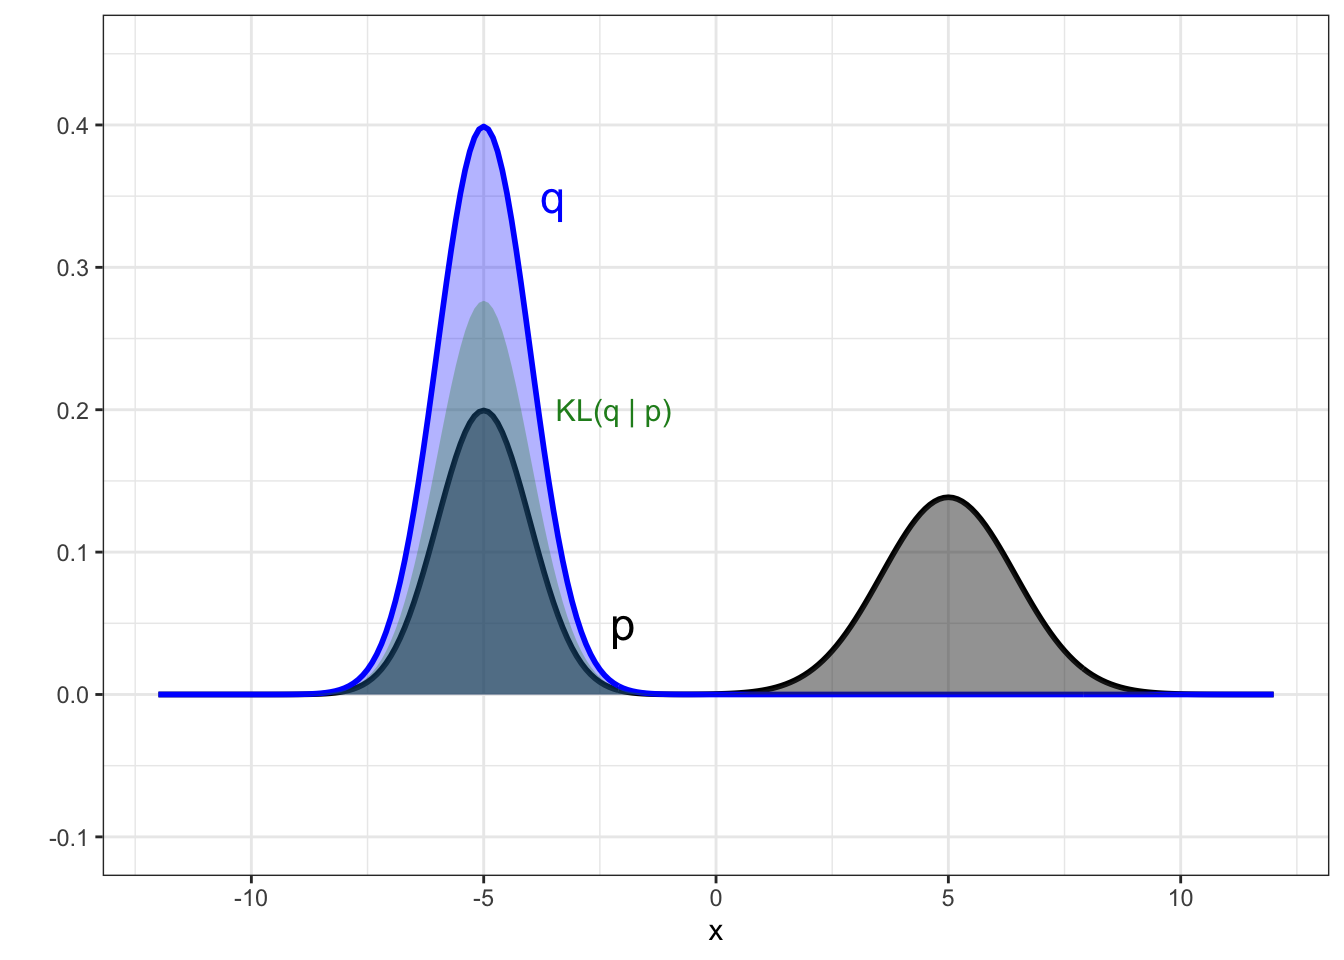 Example of the reverse KL divergence when the target posterior is multi-modal. Target posterior is shown in black, and the two panels show two alternative candidate distributions from a Gaussian family (blue). The contribution to the KL divergence is shown by the green region, with the KL figure itself being the area of this region.